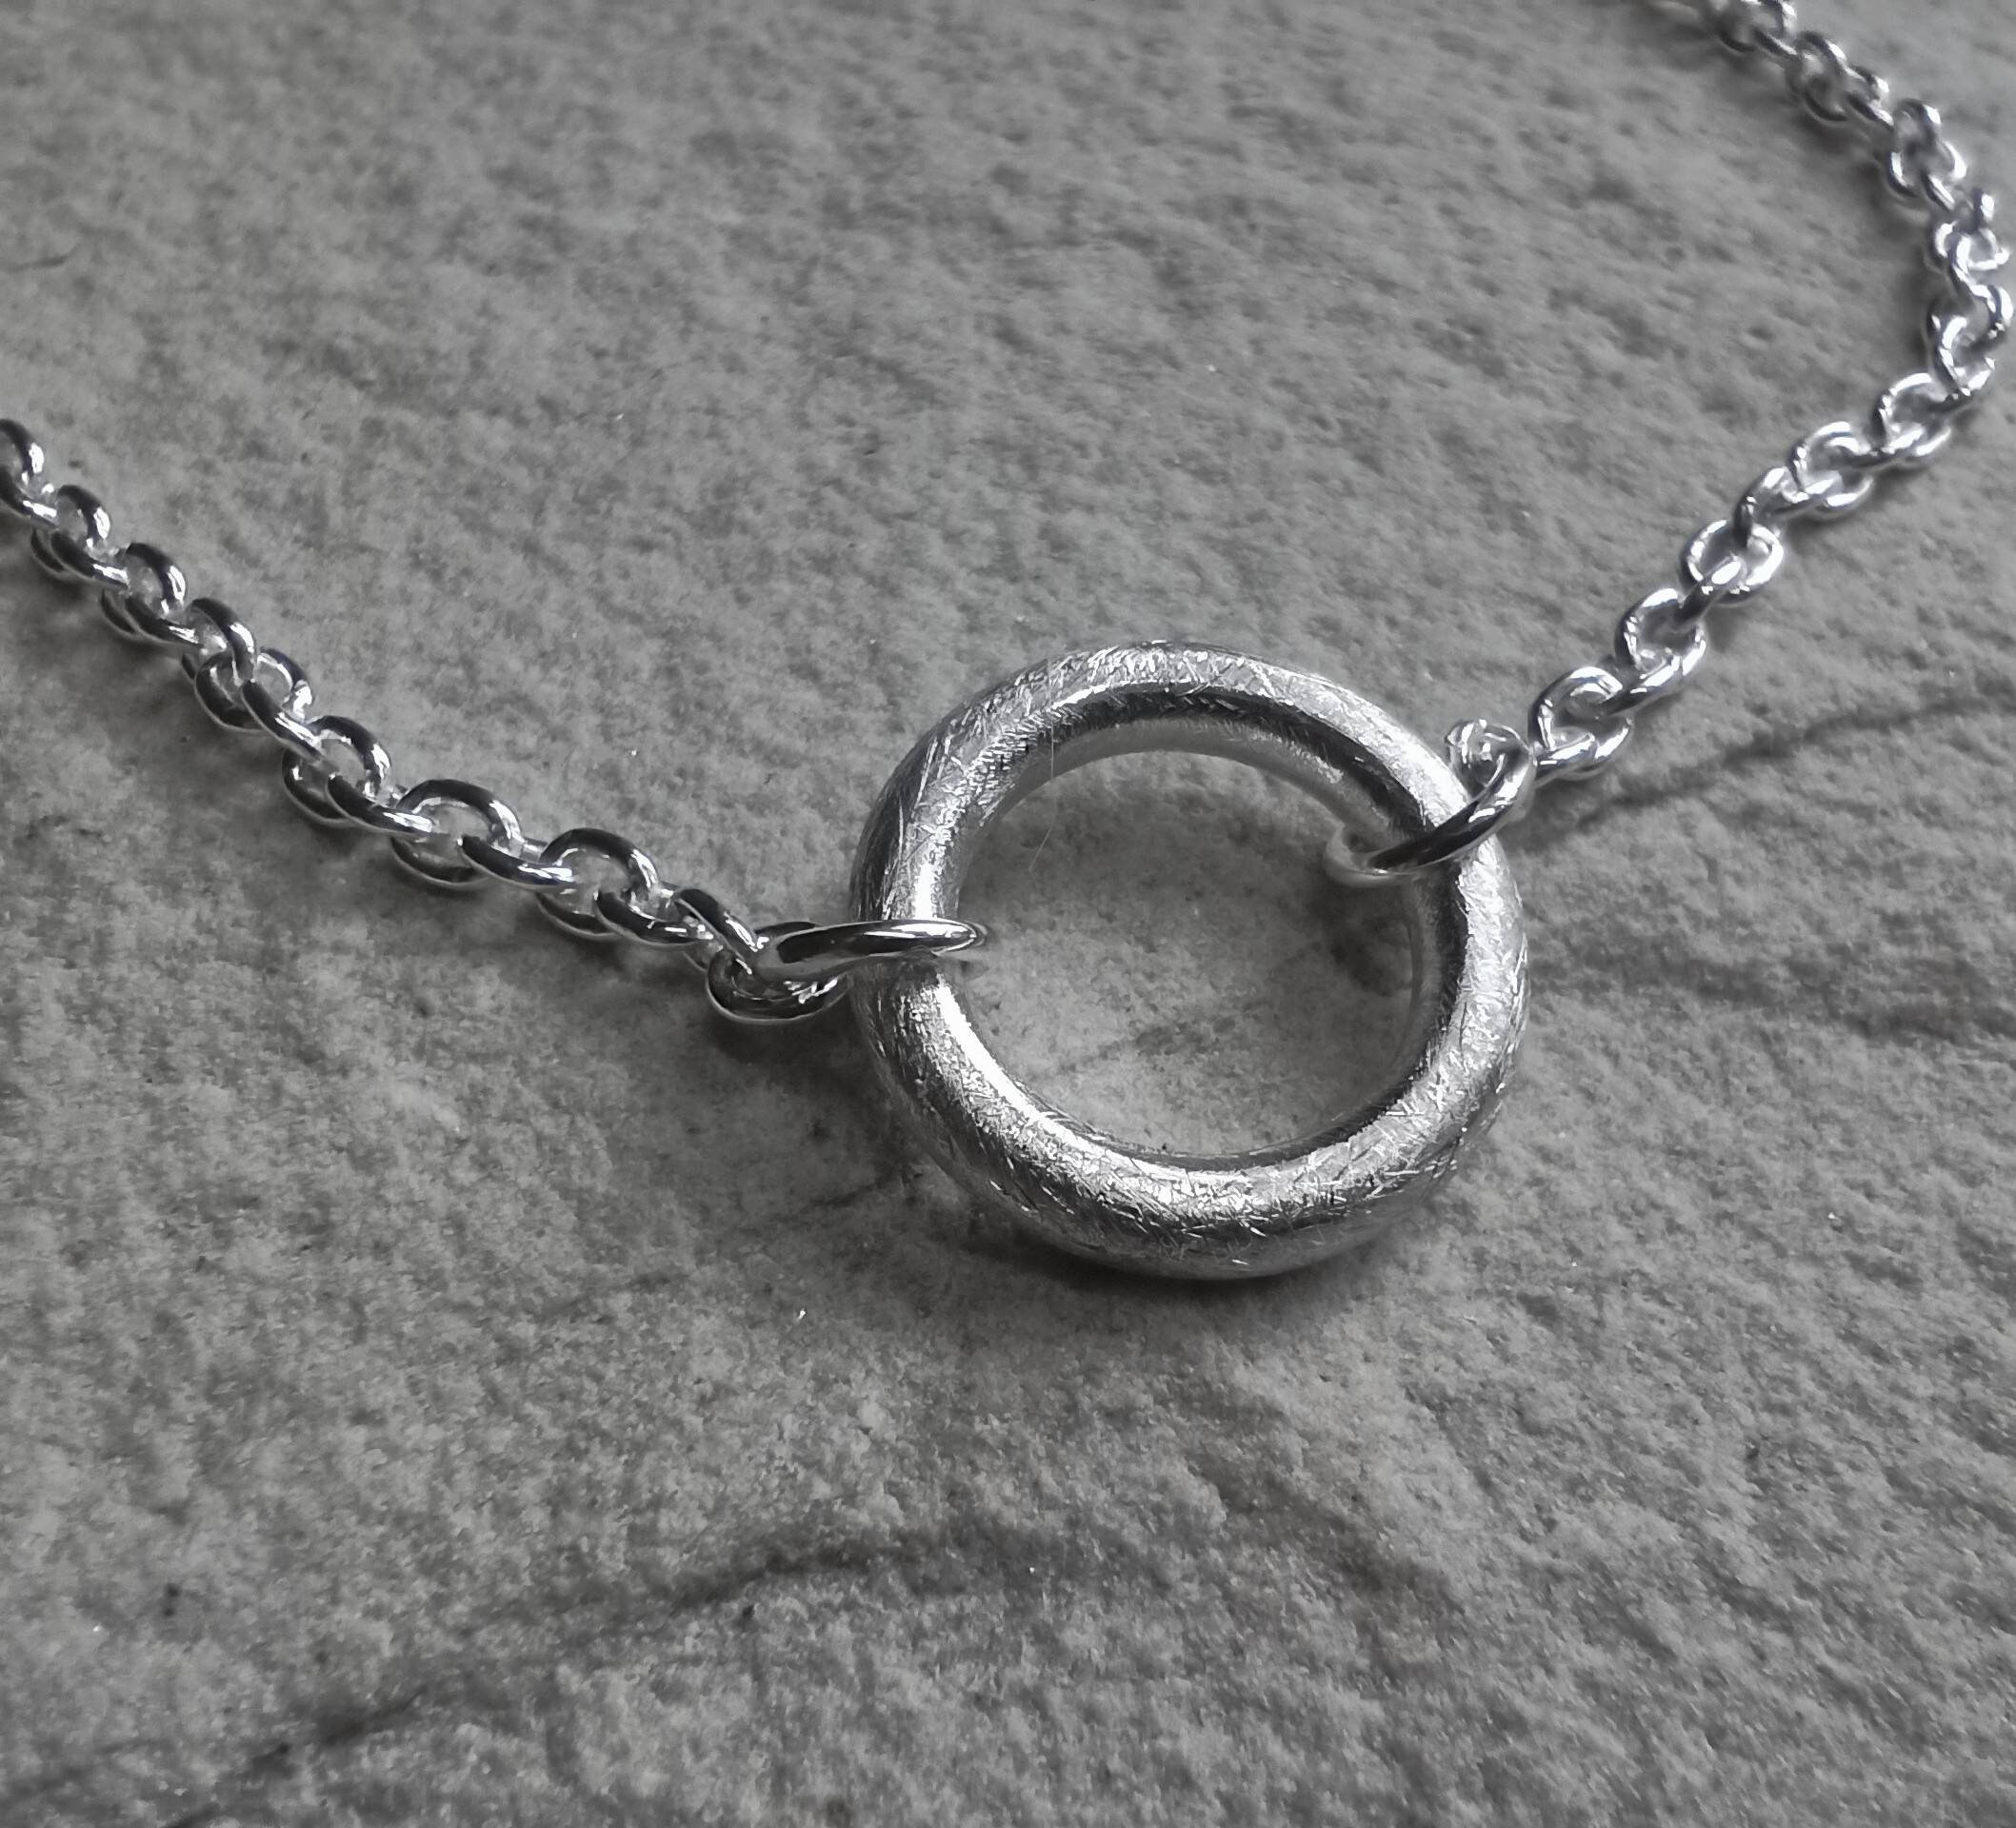 Bracelet infinity, Ring Der O, 925 Silver, Circle Ice Matt, Solid and  Stable, Handmade, Circle, Geometric, Sub-jewelry, Partner Jewelry 